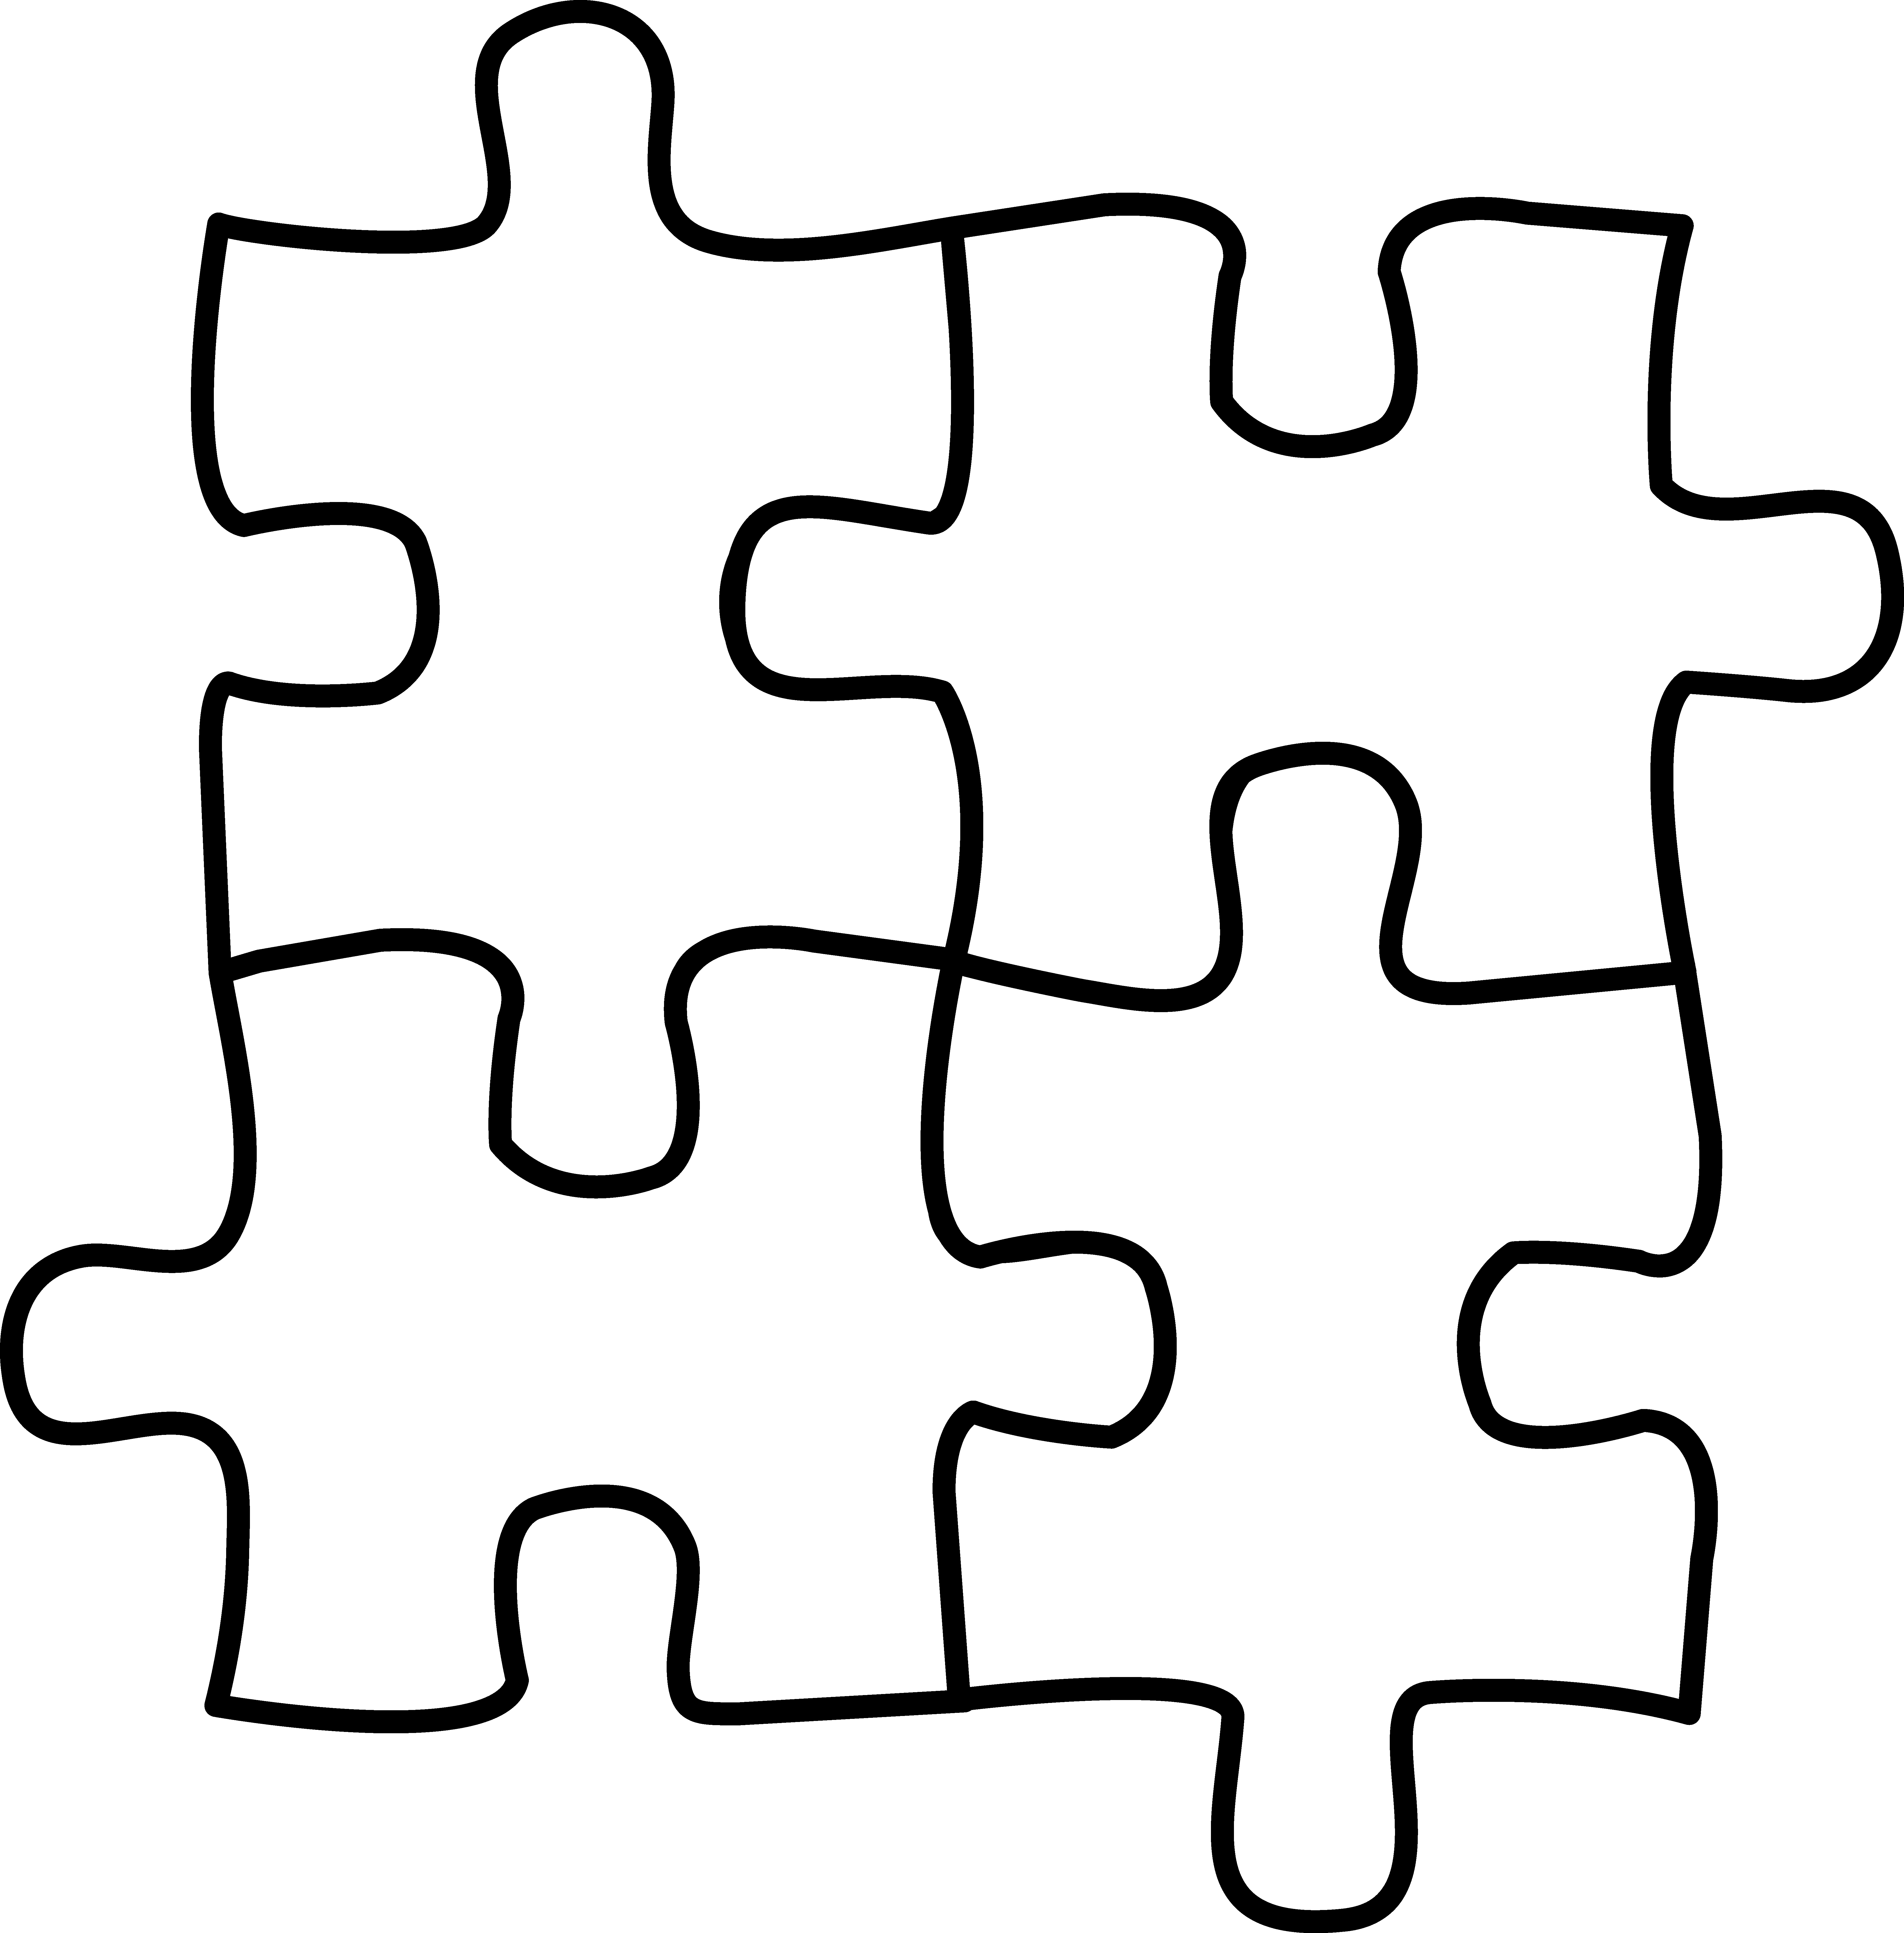  collection of free. Teamwork clipart jigsaw puzzle